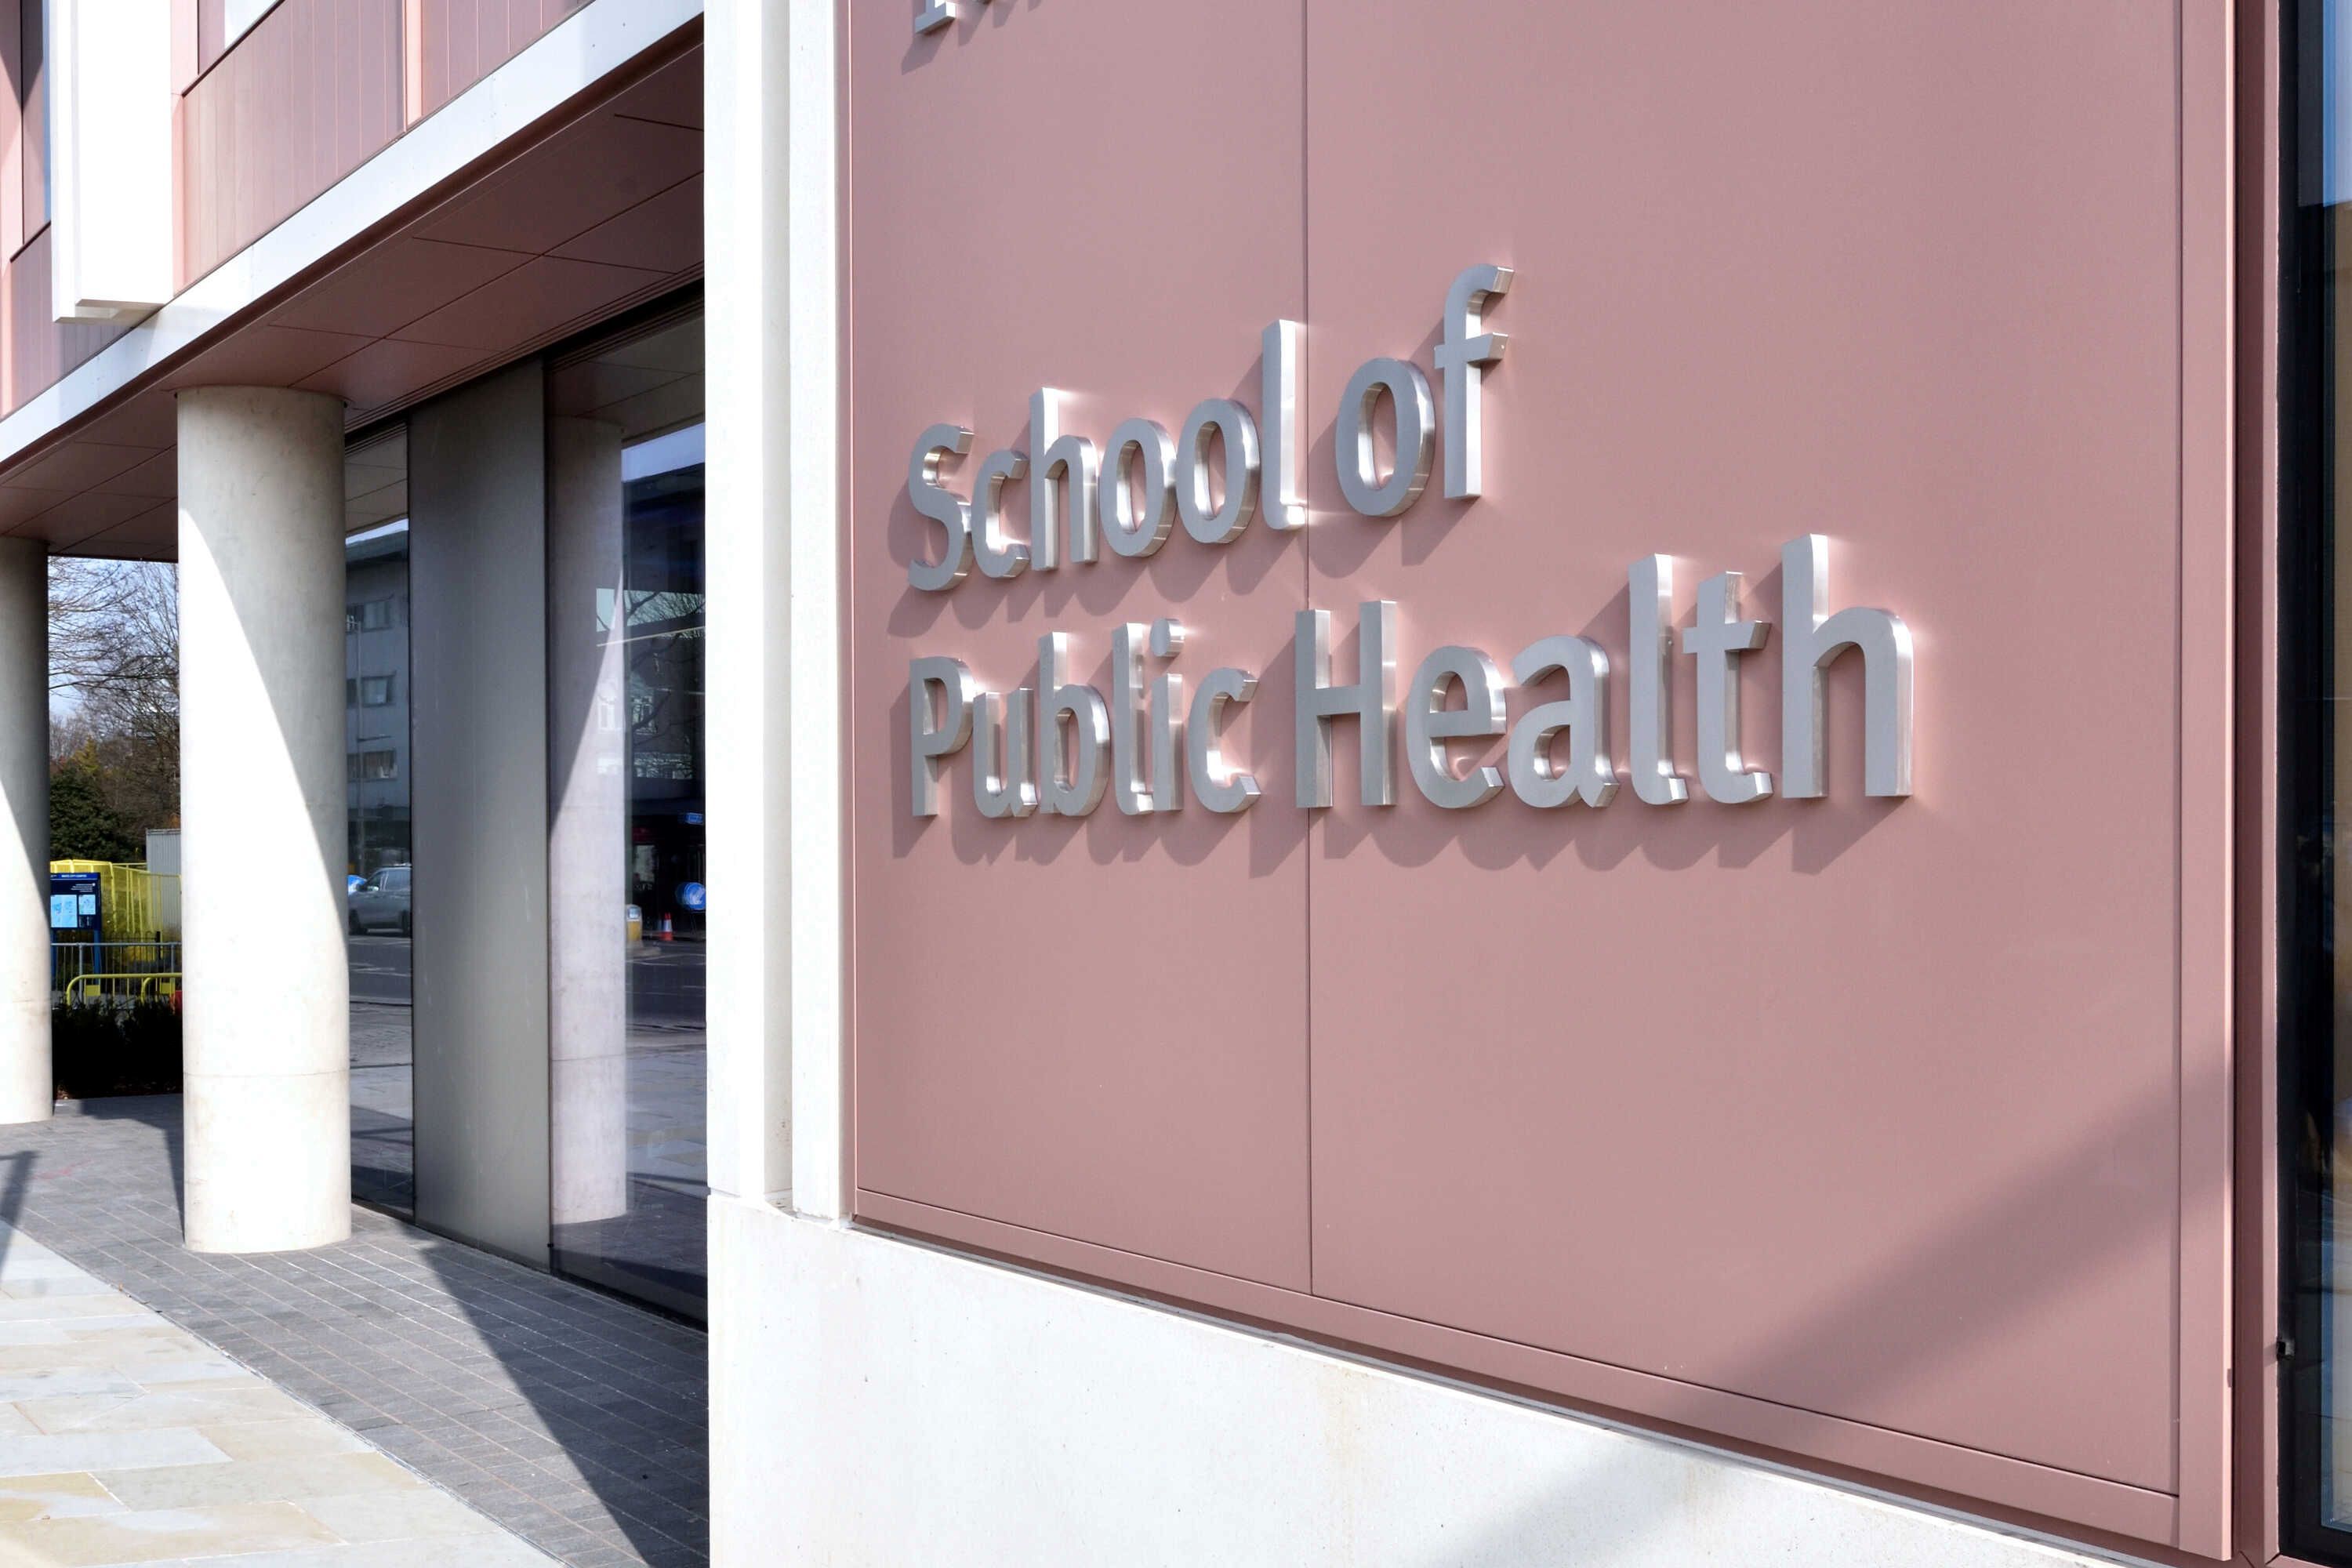 The exterior of the new School of Public Health